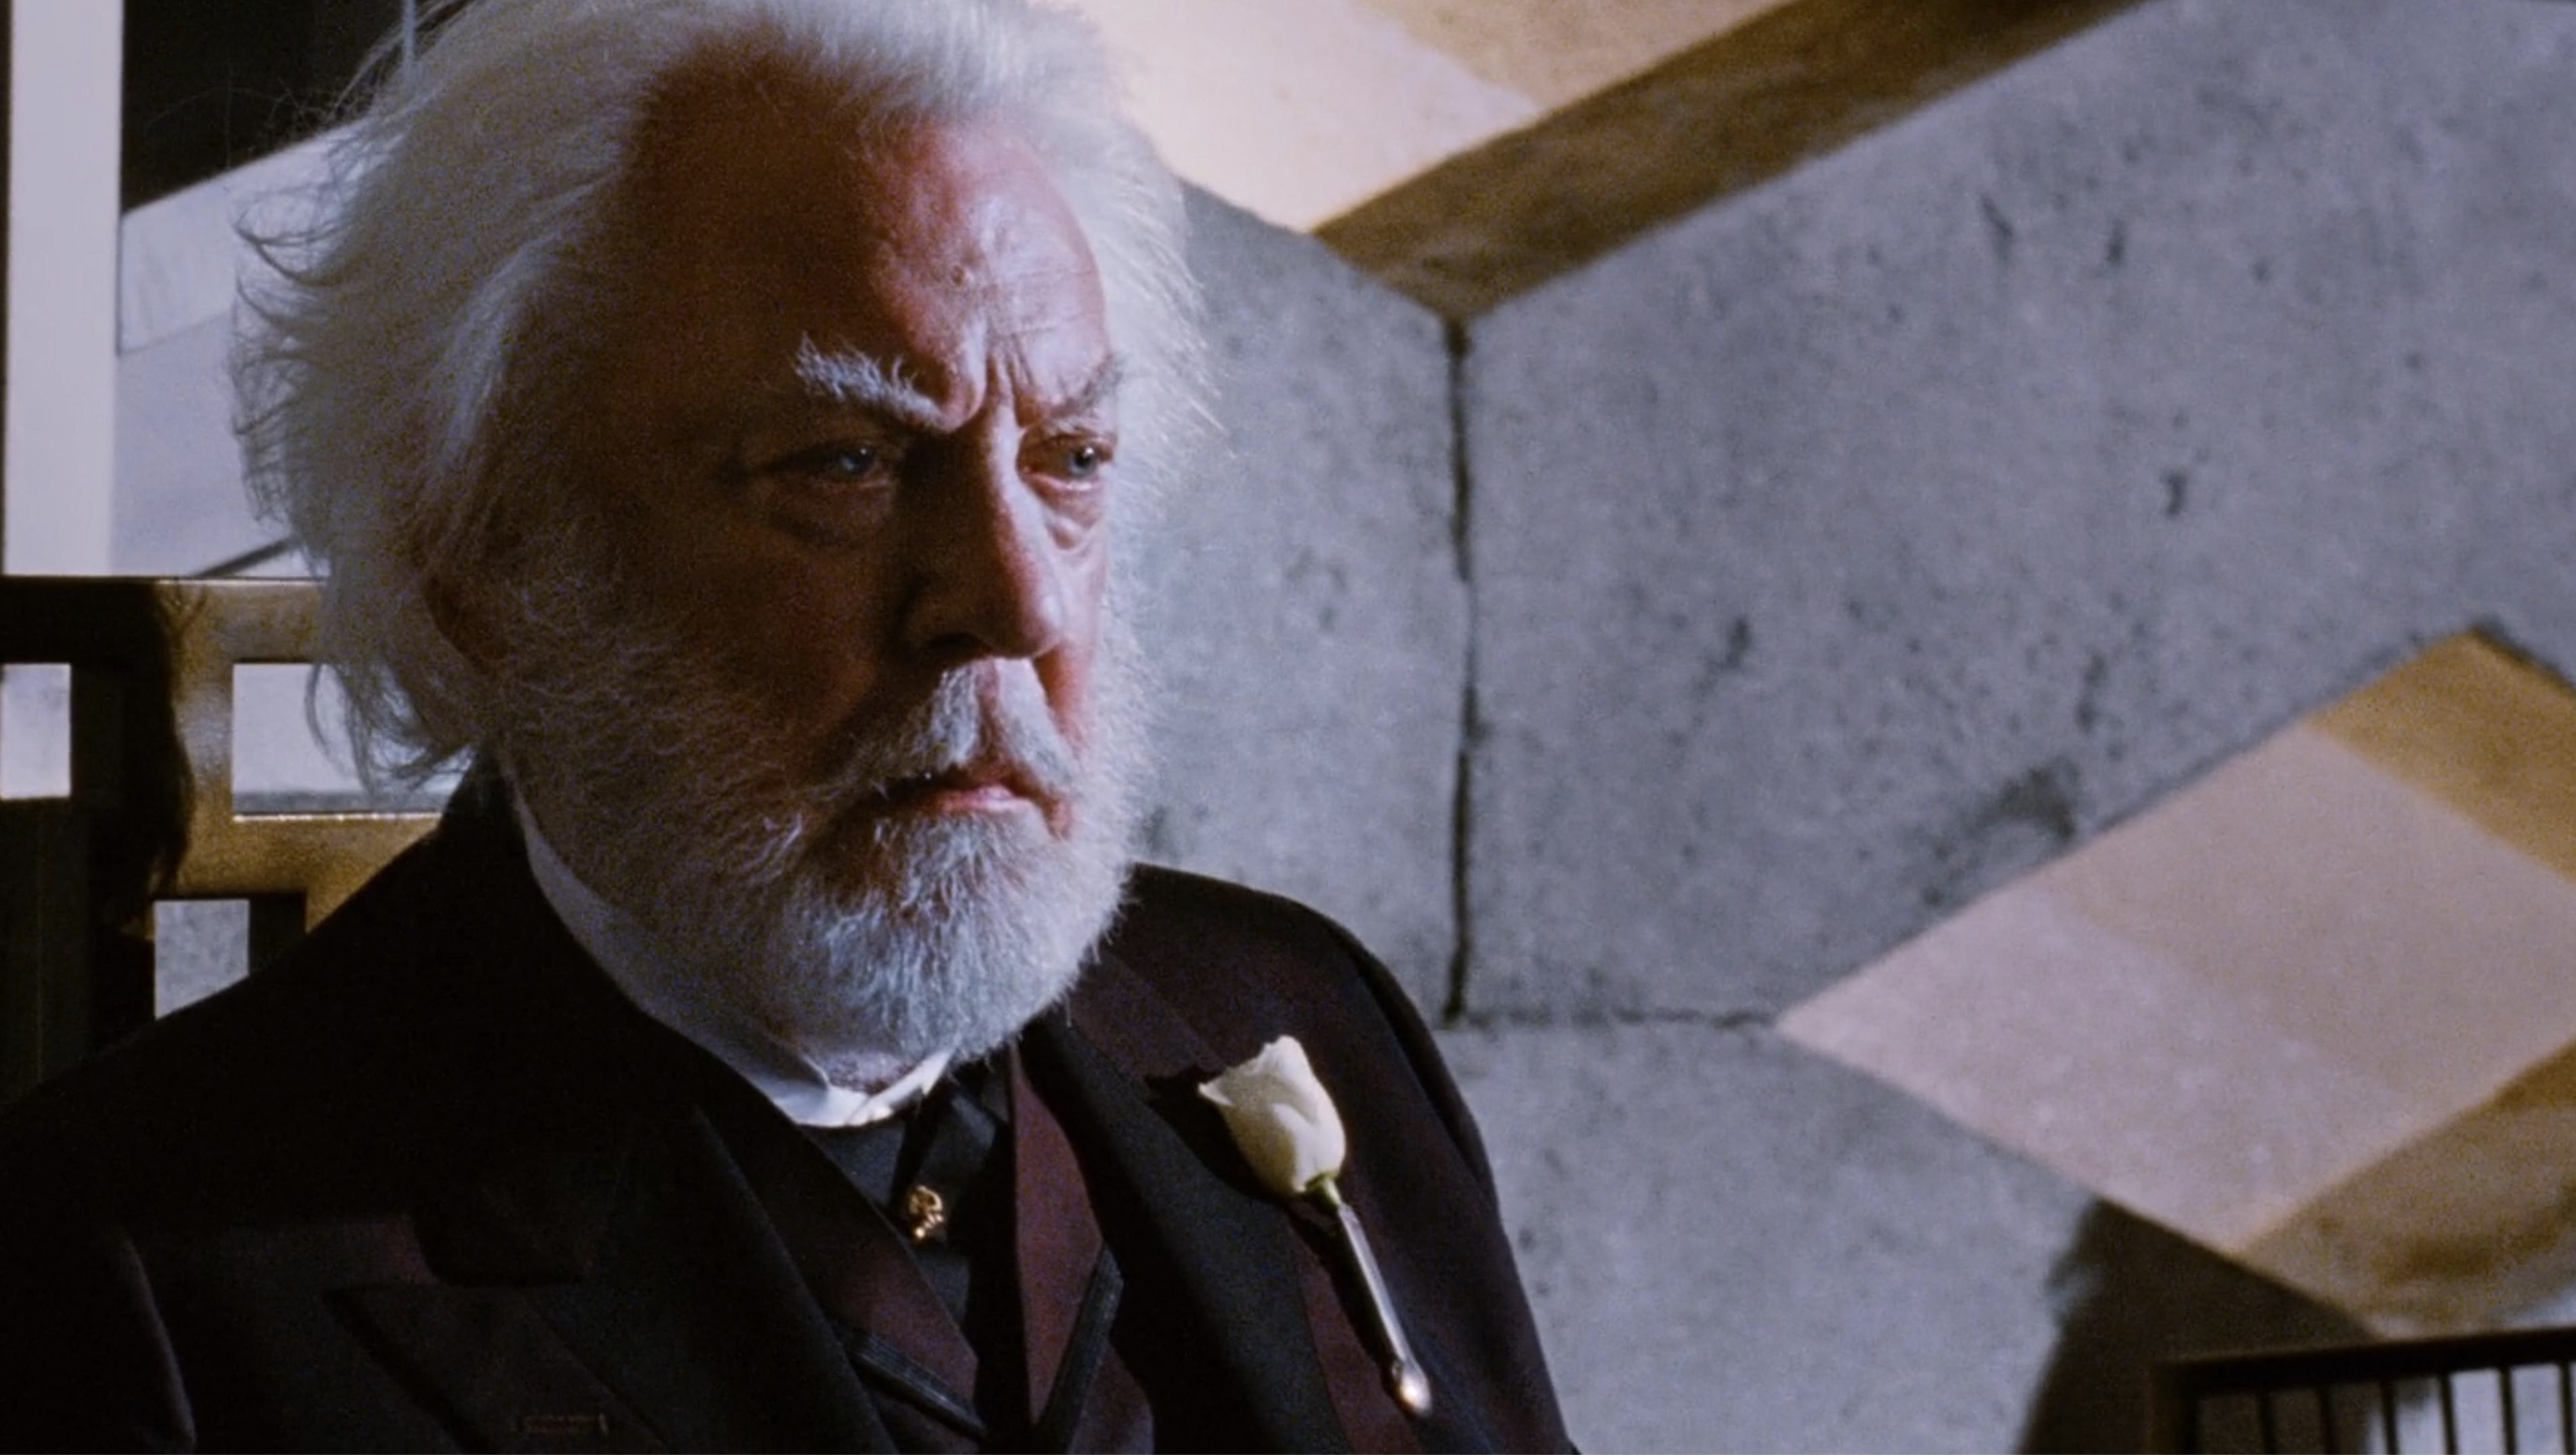 The Hunger Games on Netflix - Donald Sutherland as Coriolanus Snow